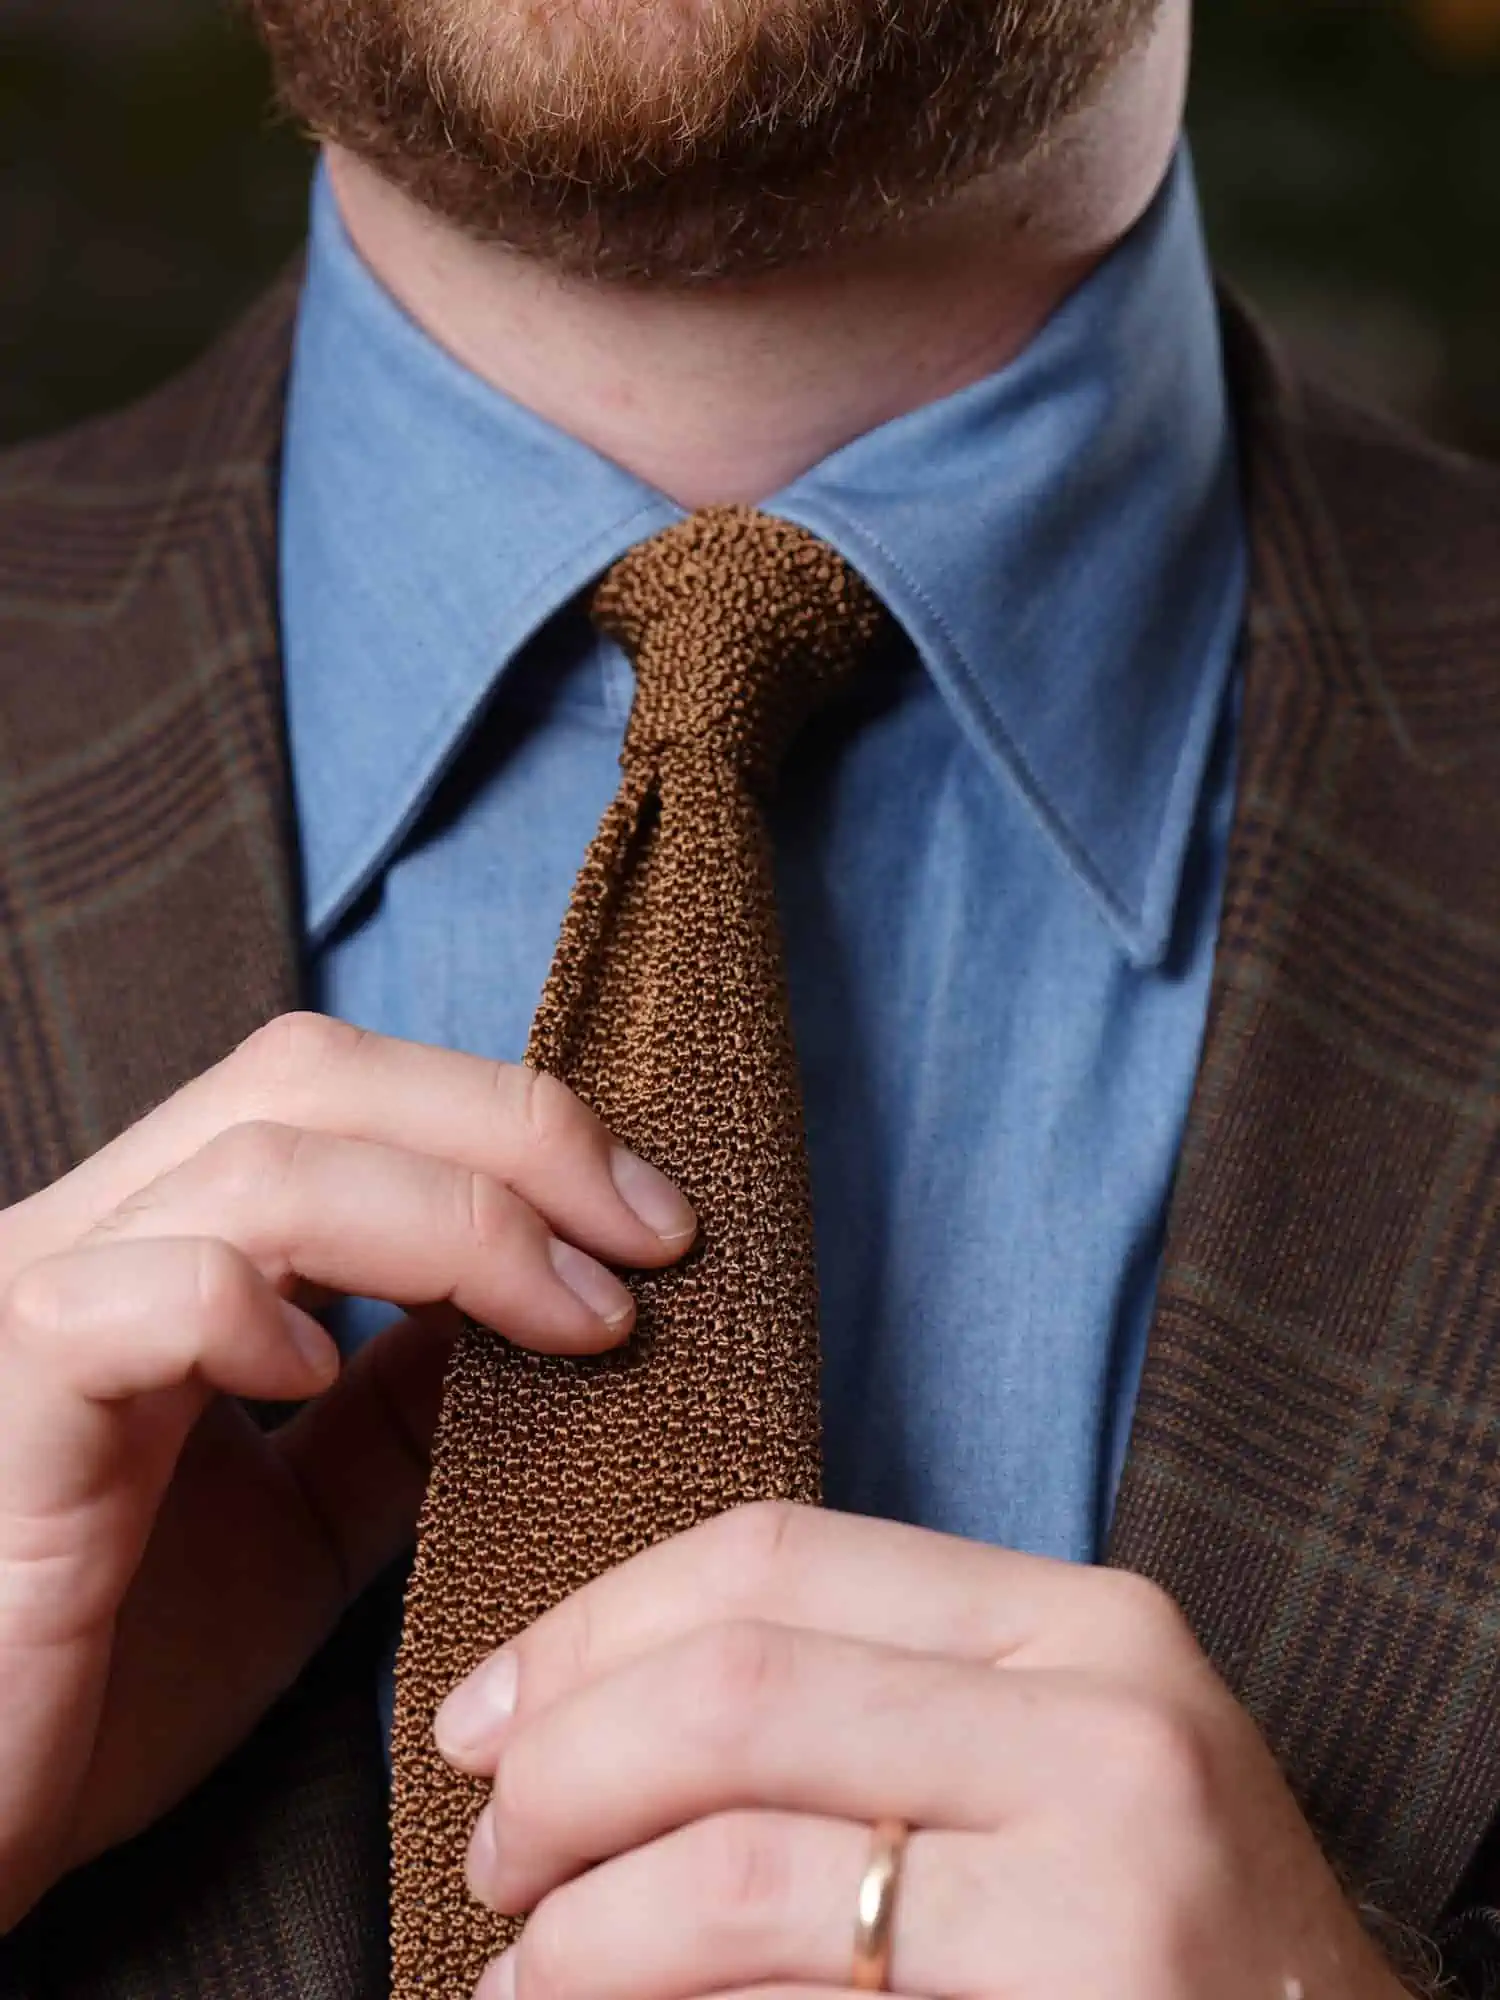 substantial ties such as knit ties require a slimmer knot than the Half Windsor Knot